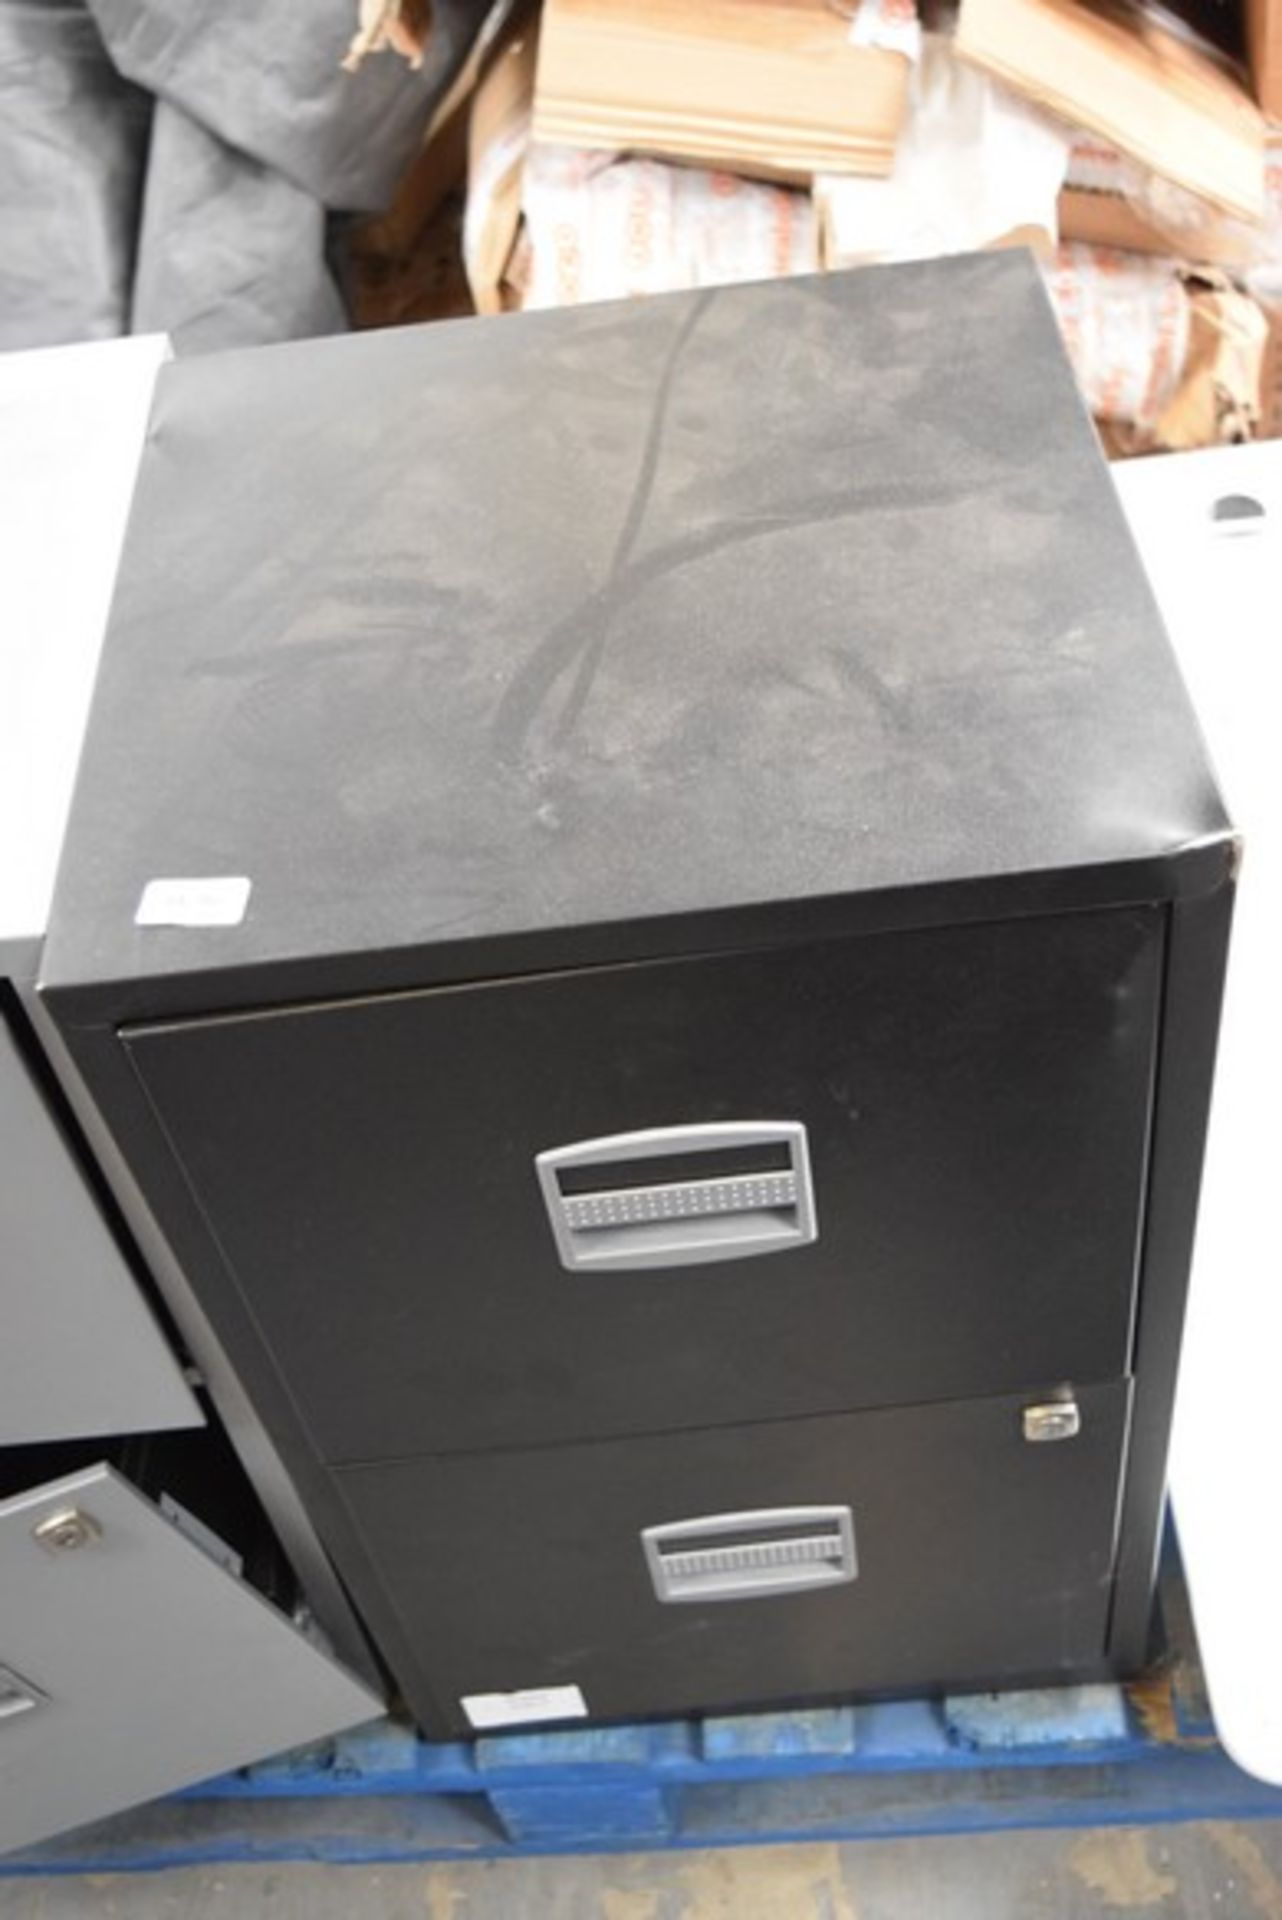 1 x 2-DRAWER A4 FILING CABINET RRP £50 13.06.17 *PLEASE NOTE THAT THE BID PRICE IS MULTIPLIED BY THE